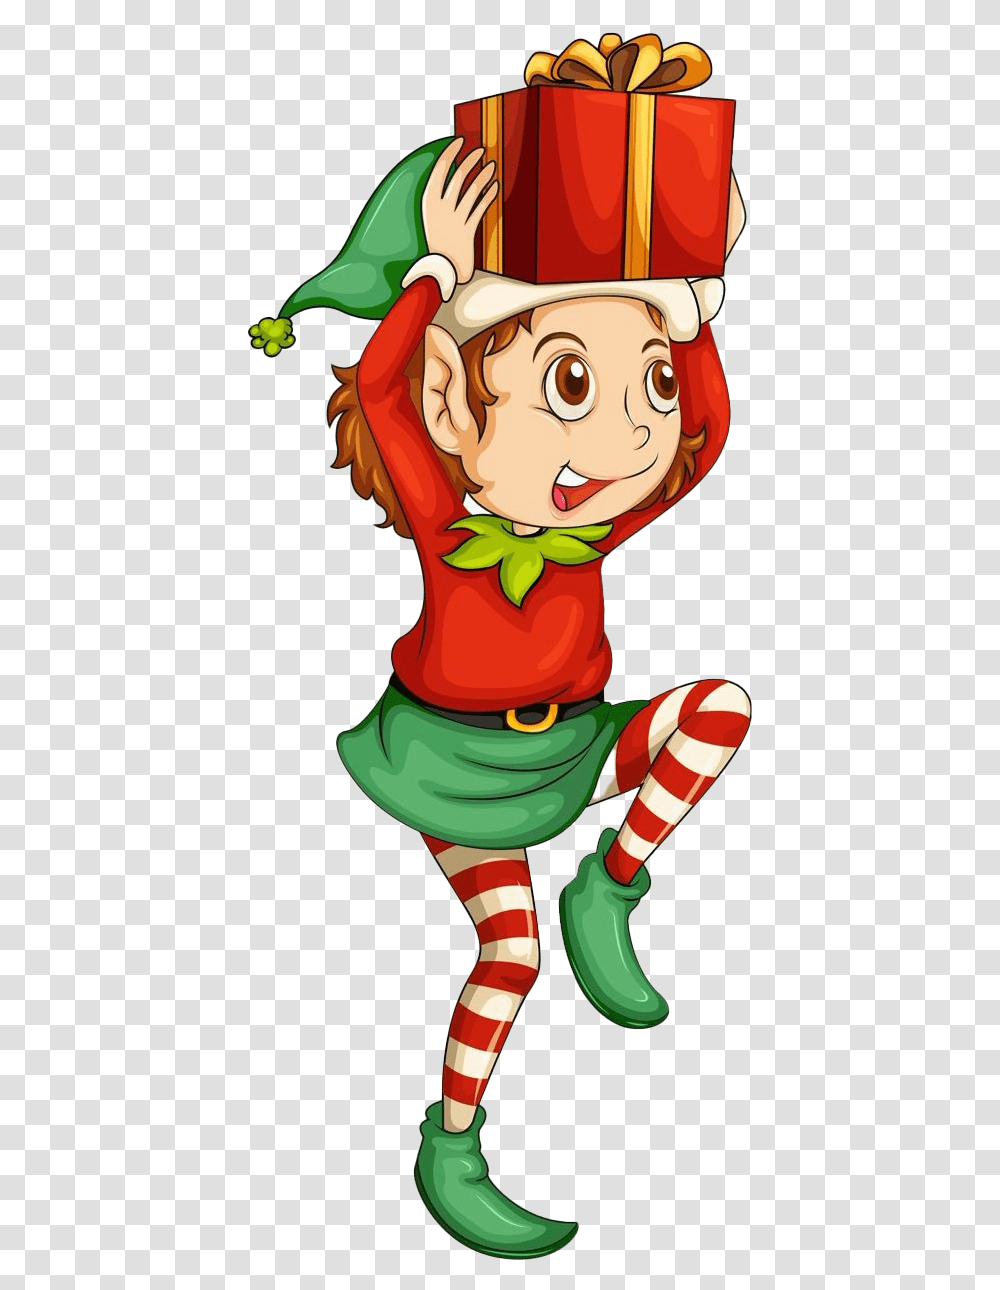 Christmas Elf Image Christmas Elf, Toy, Sweets, Food, Confectionery Transparent Png